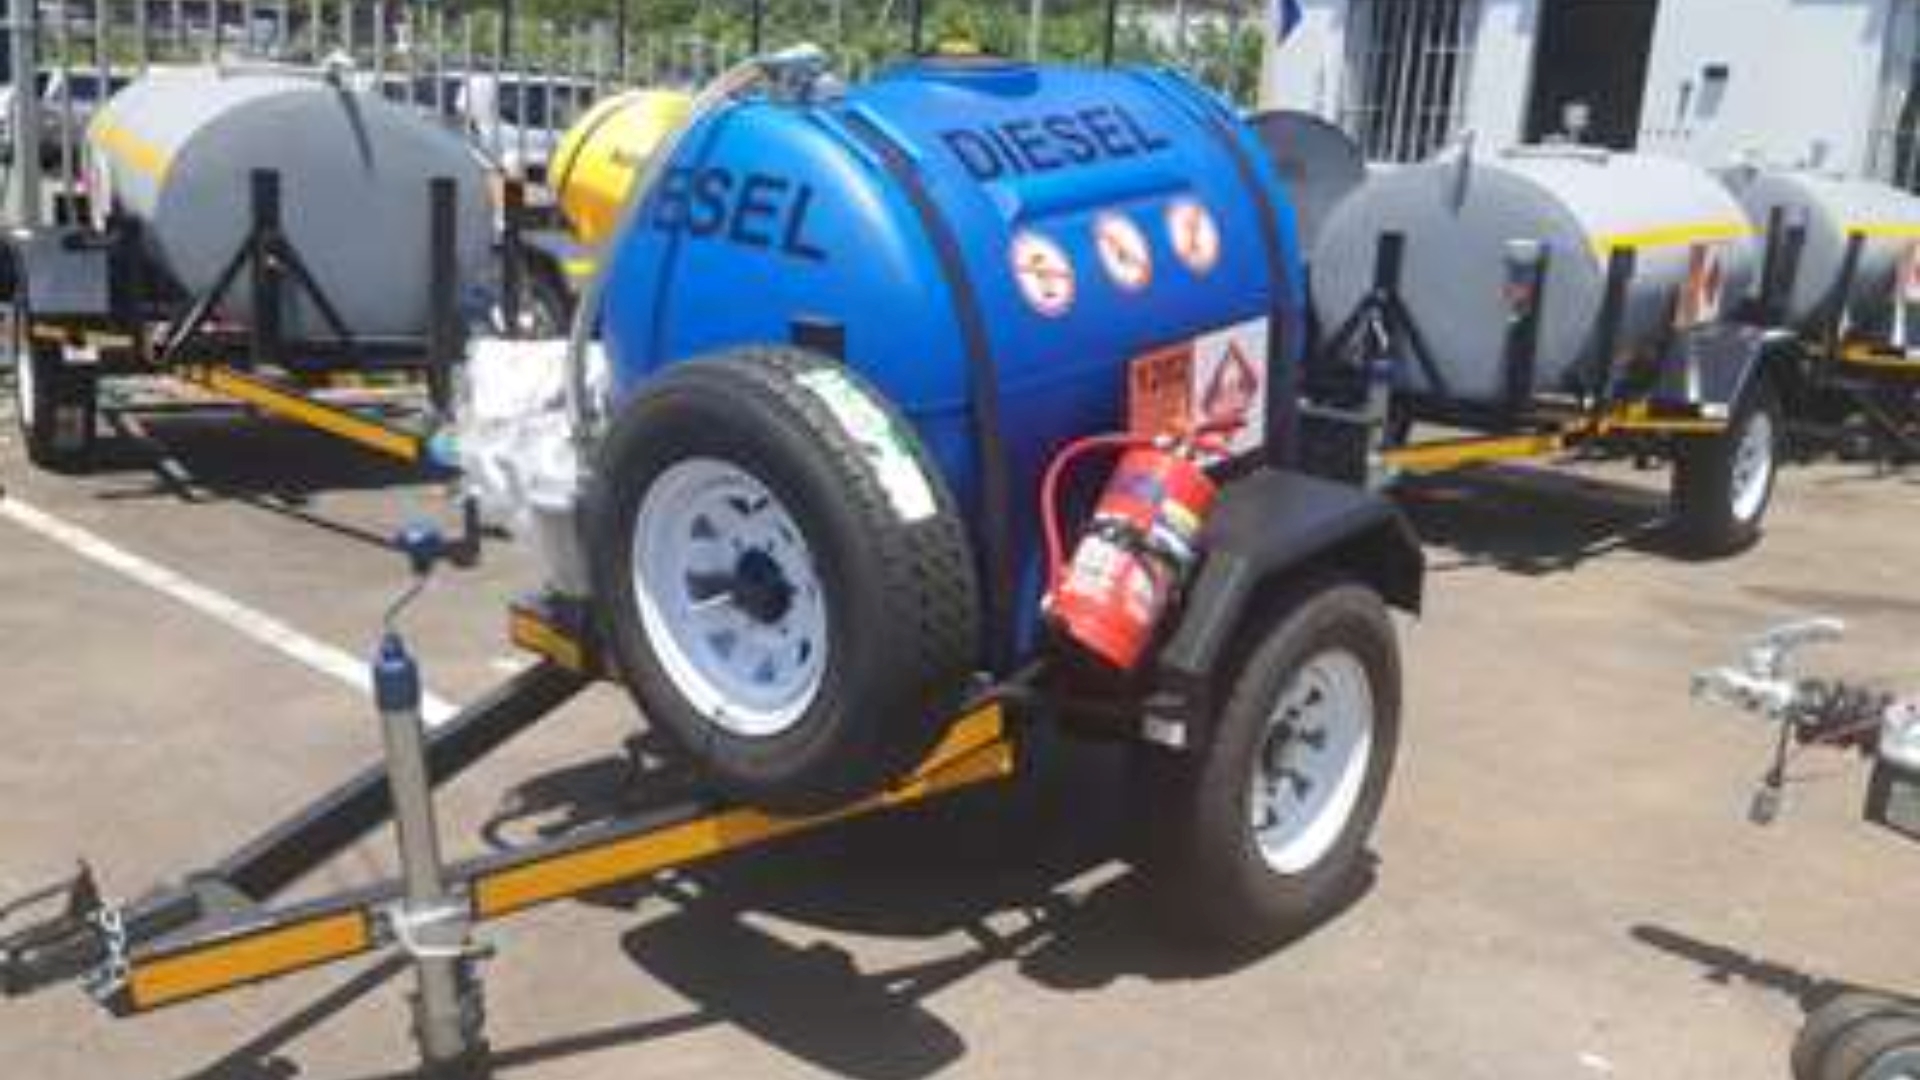 Custom Diesel bowser trailer 600 LITRE PLASTIC DIESEL/WATERBOWSER  76x38mm 2022 for sale by Jikelele Tankers and Trailers   | Truck & Trailer Marketplaces